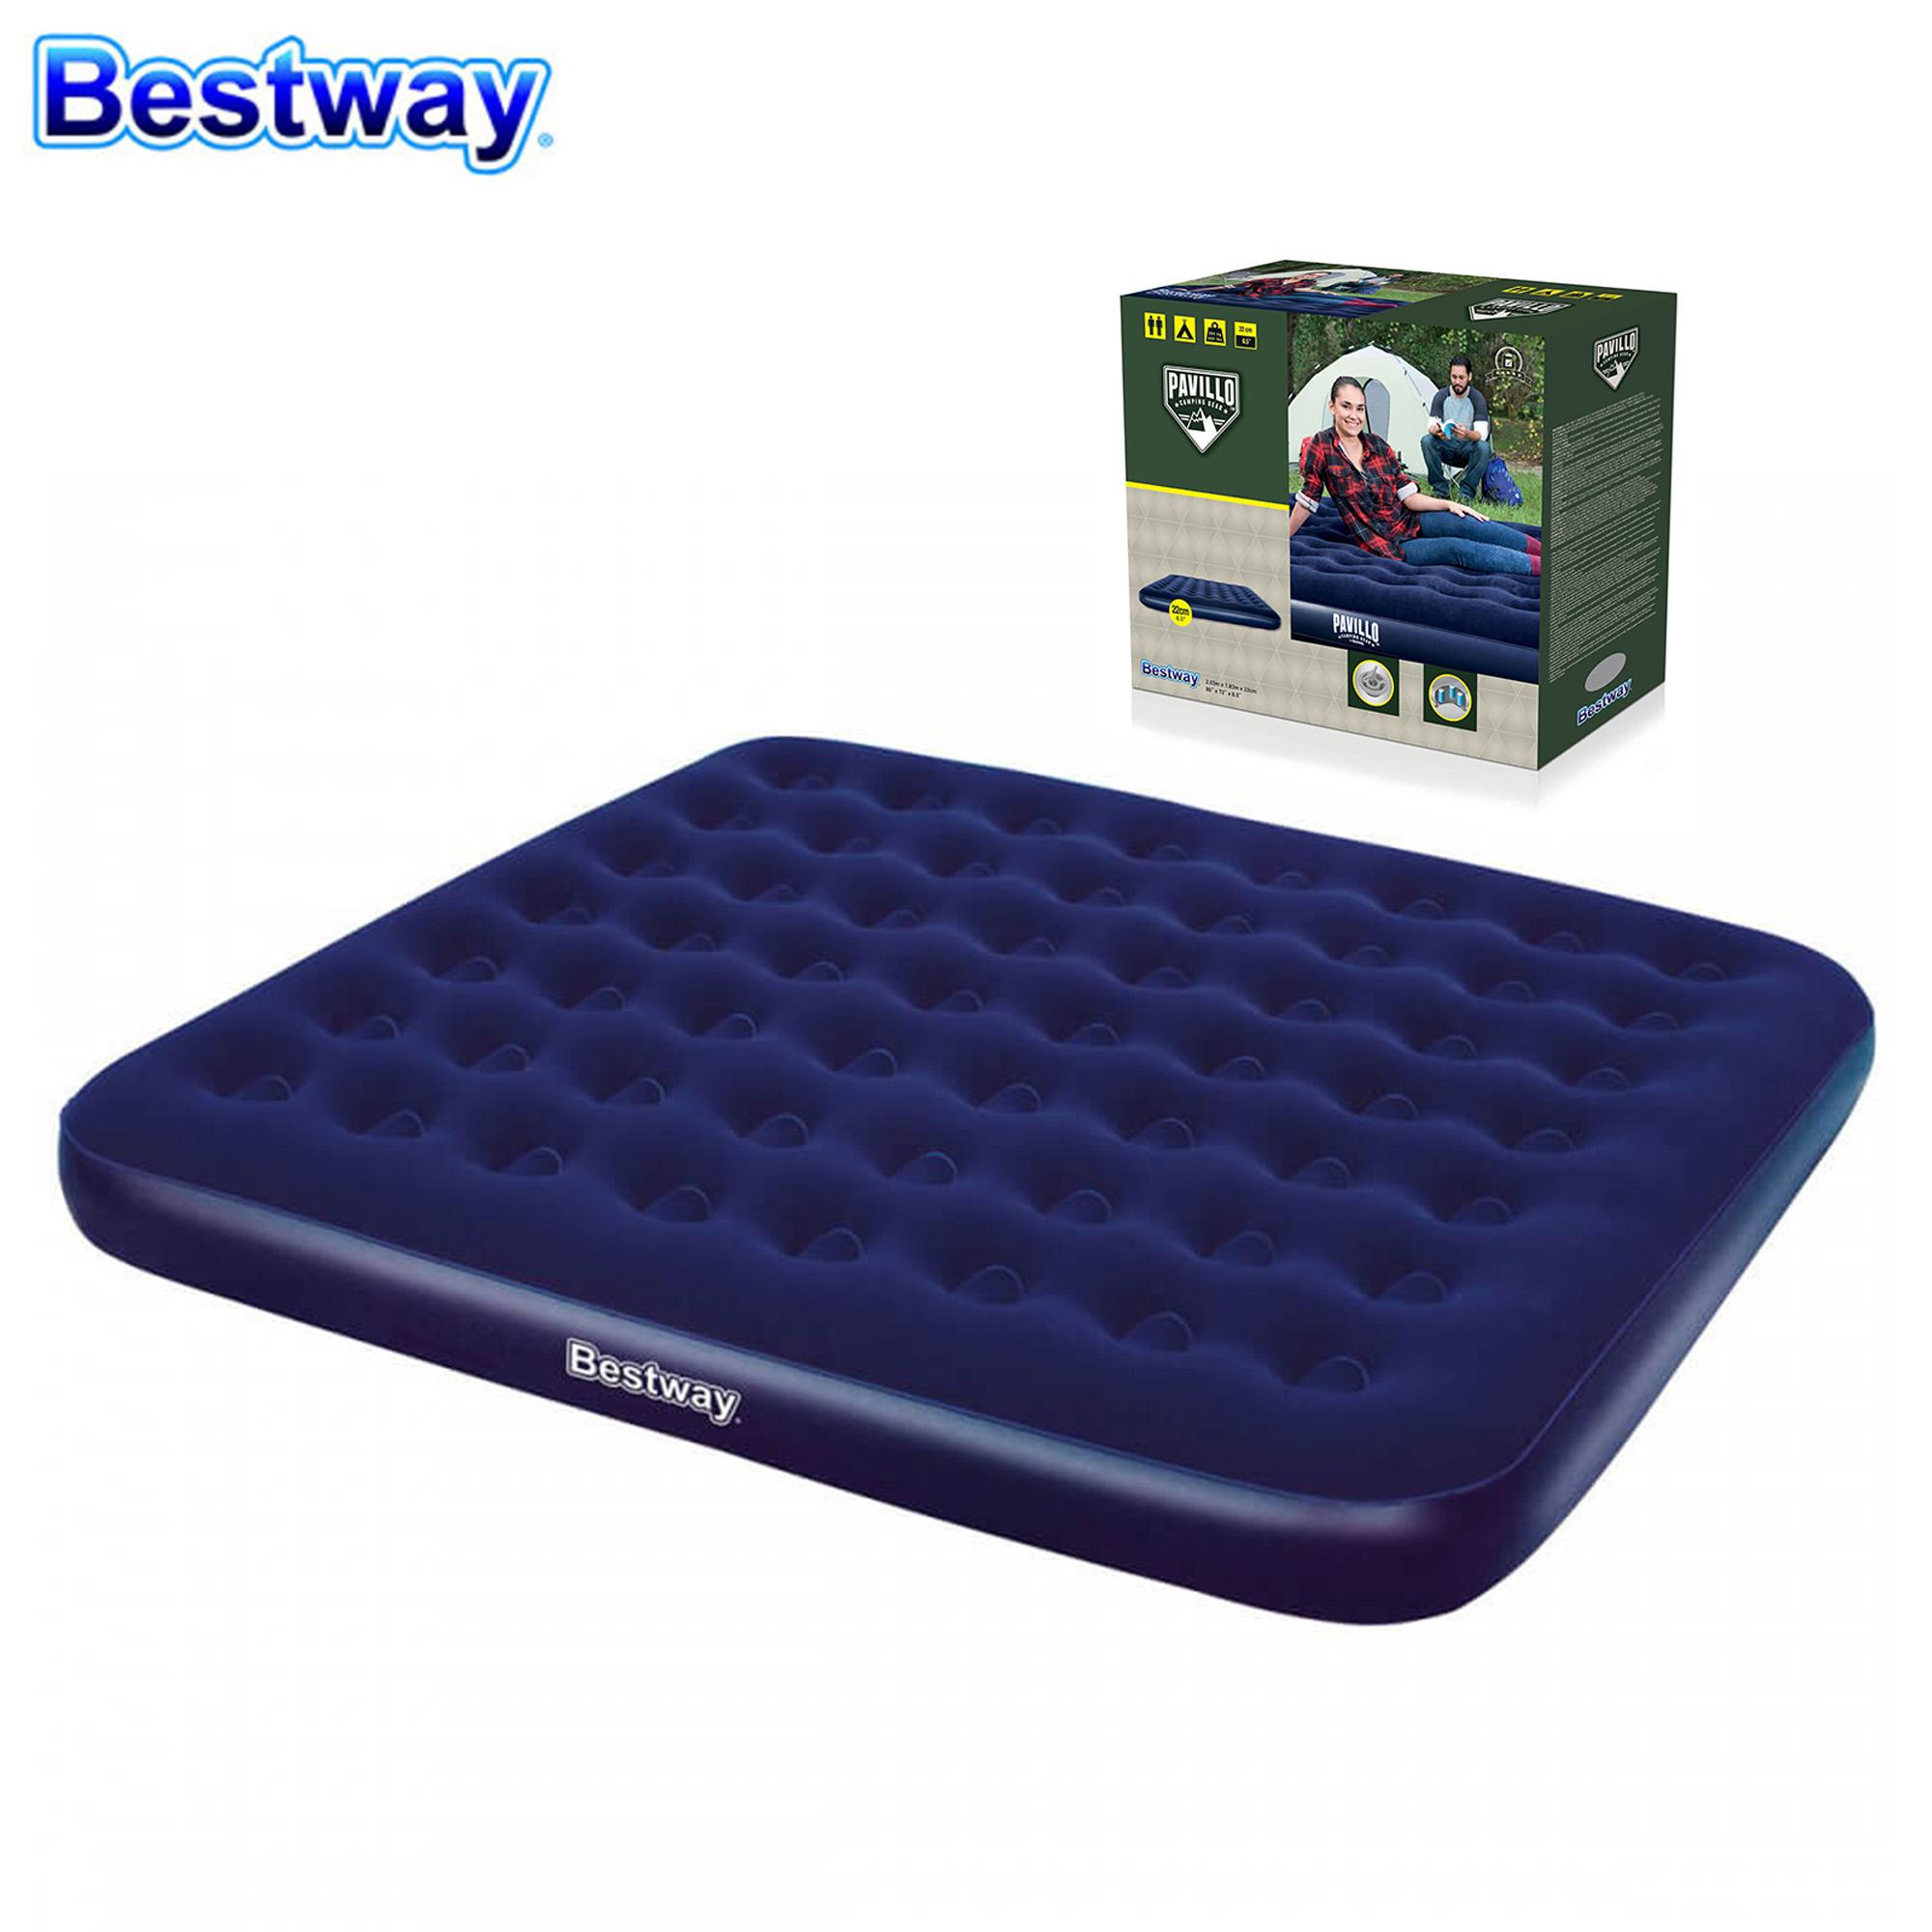 Bestway Inflatable Air Bed King Size Pavillo 67004 Lazada Ph